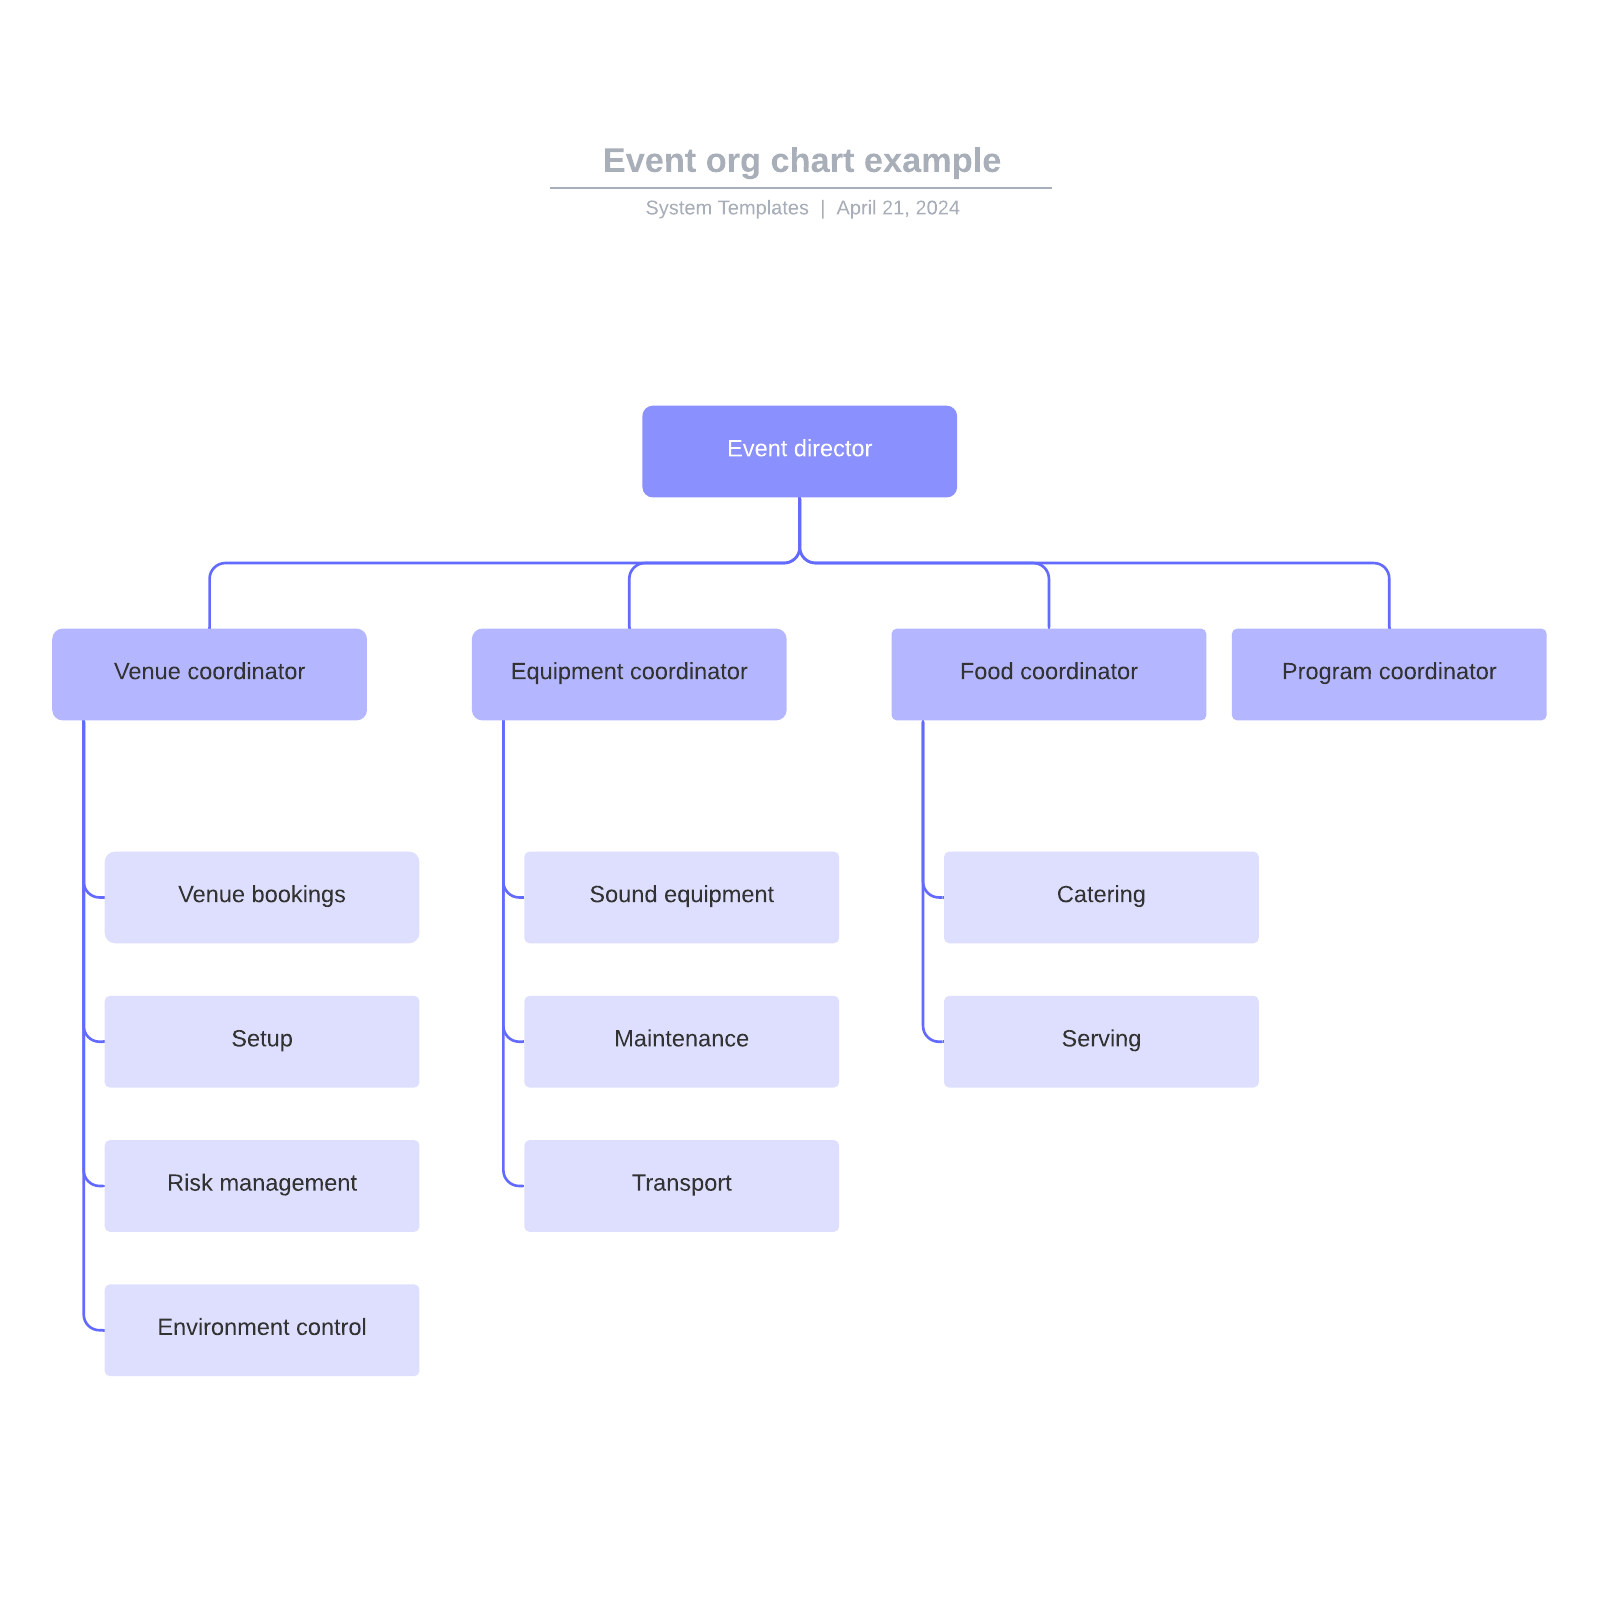 Event org chart example example